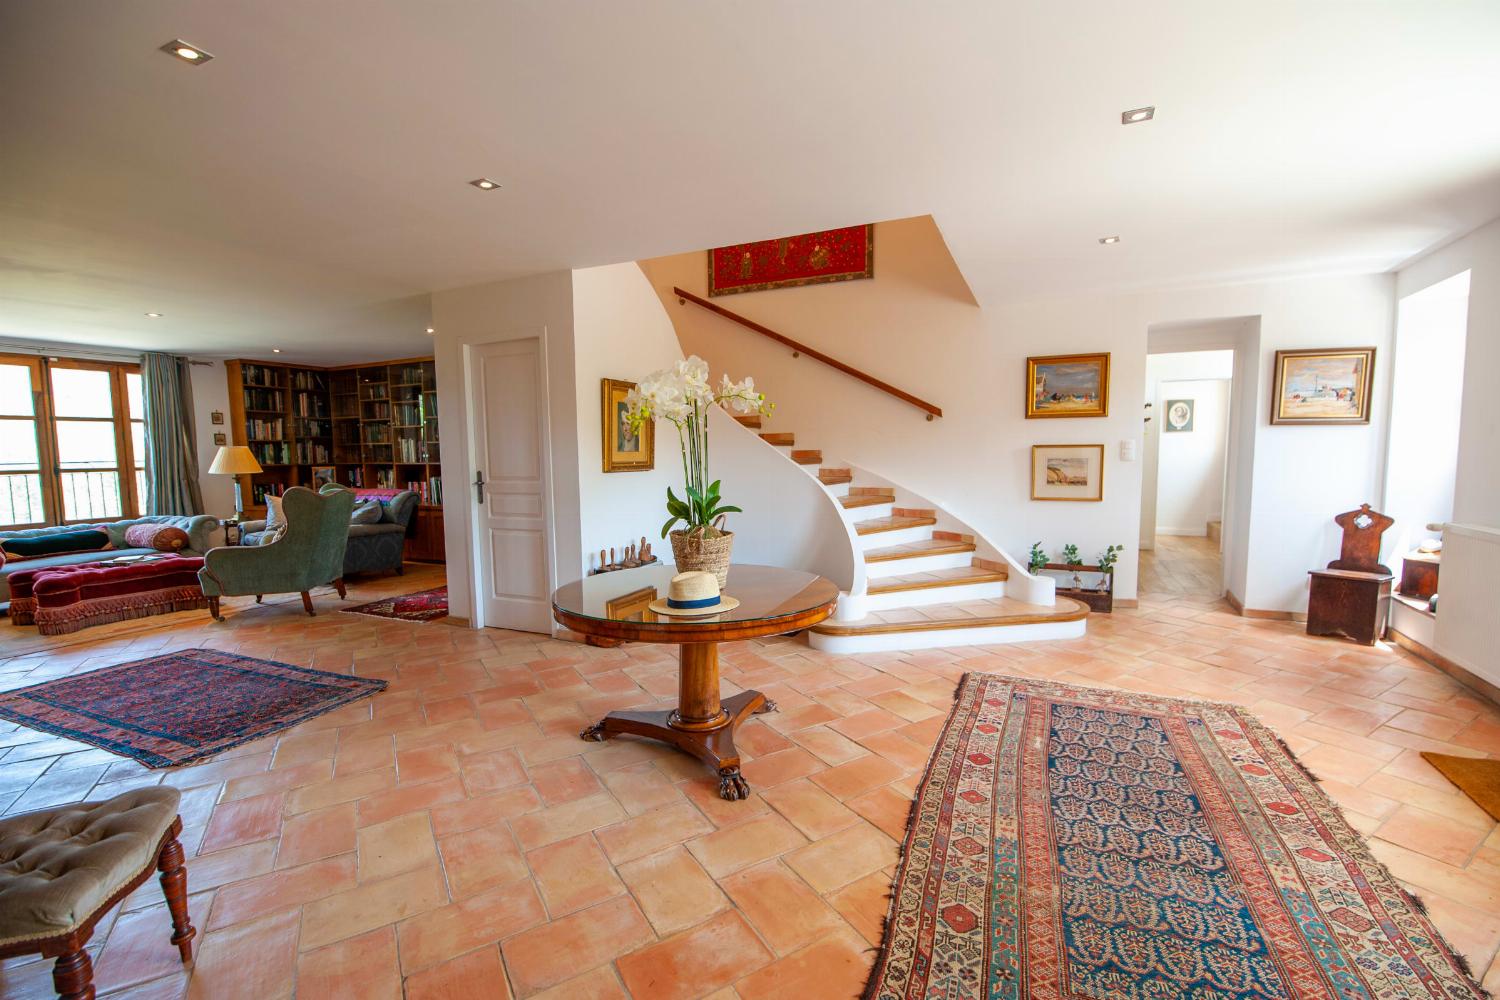 Entrance hallway | Holiday accommodation in the South of France